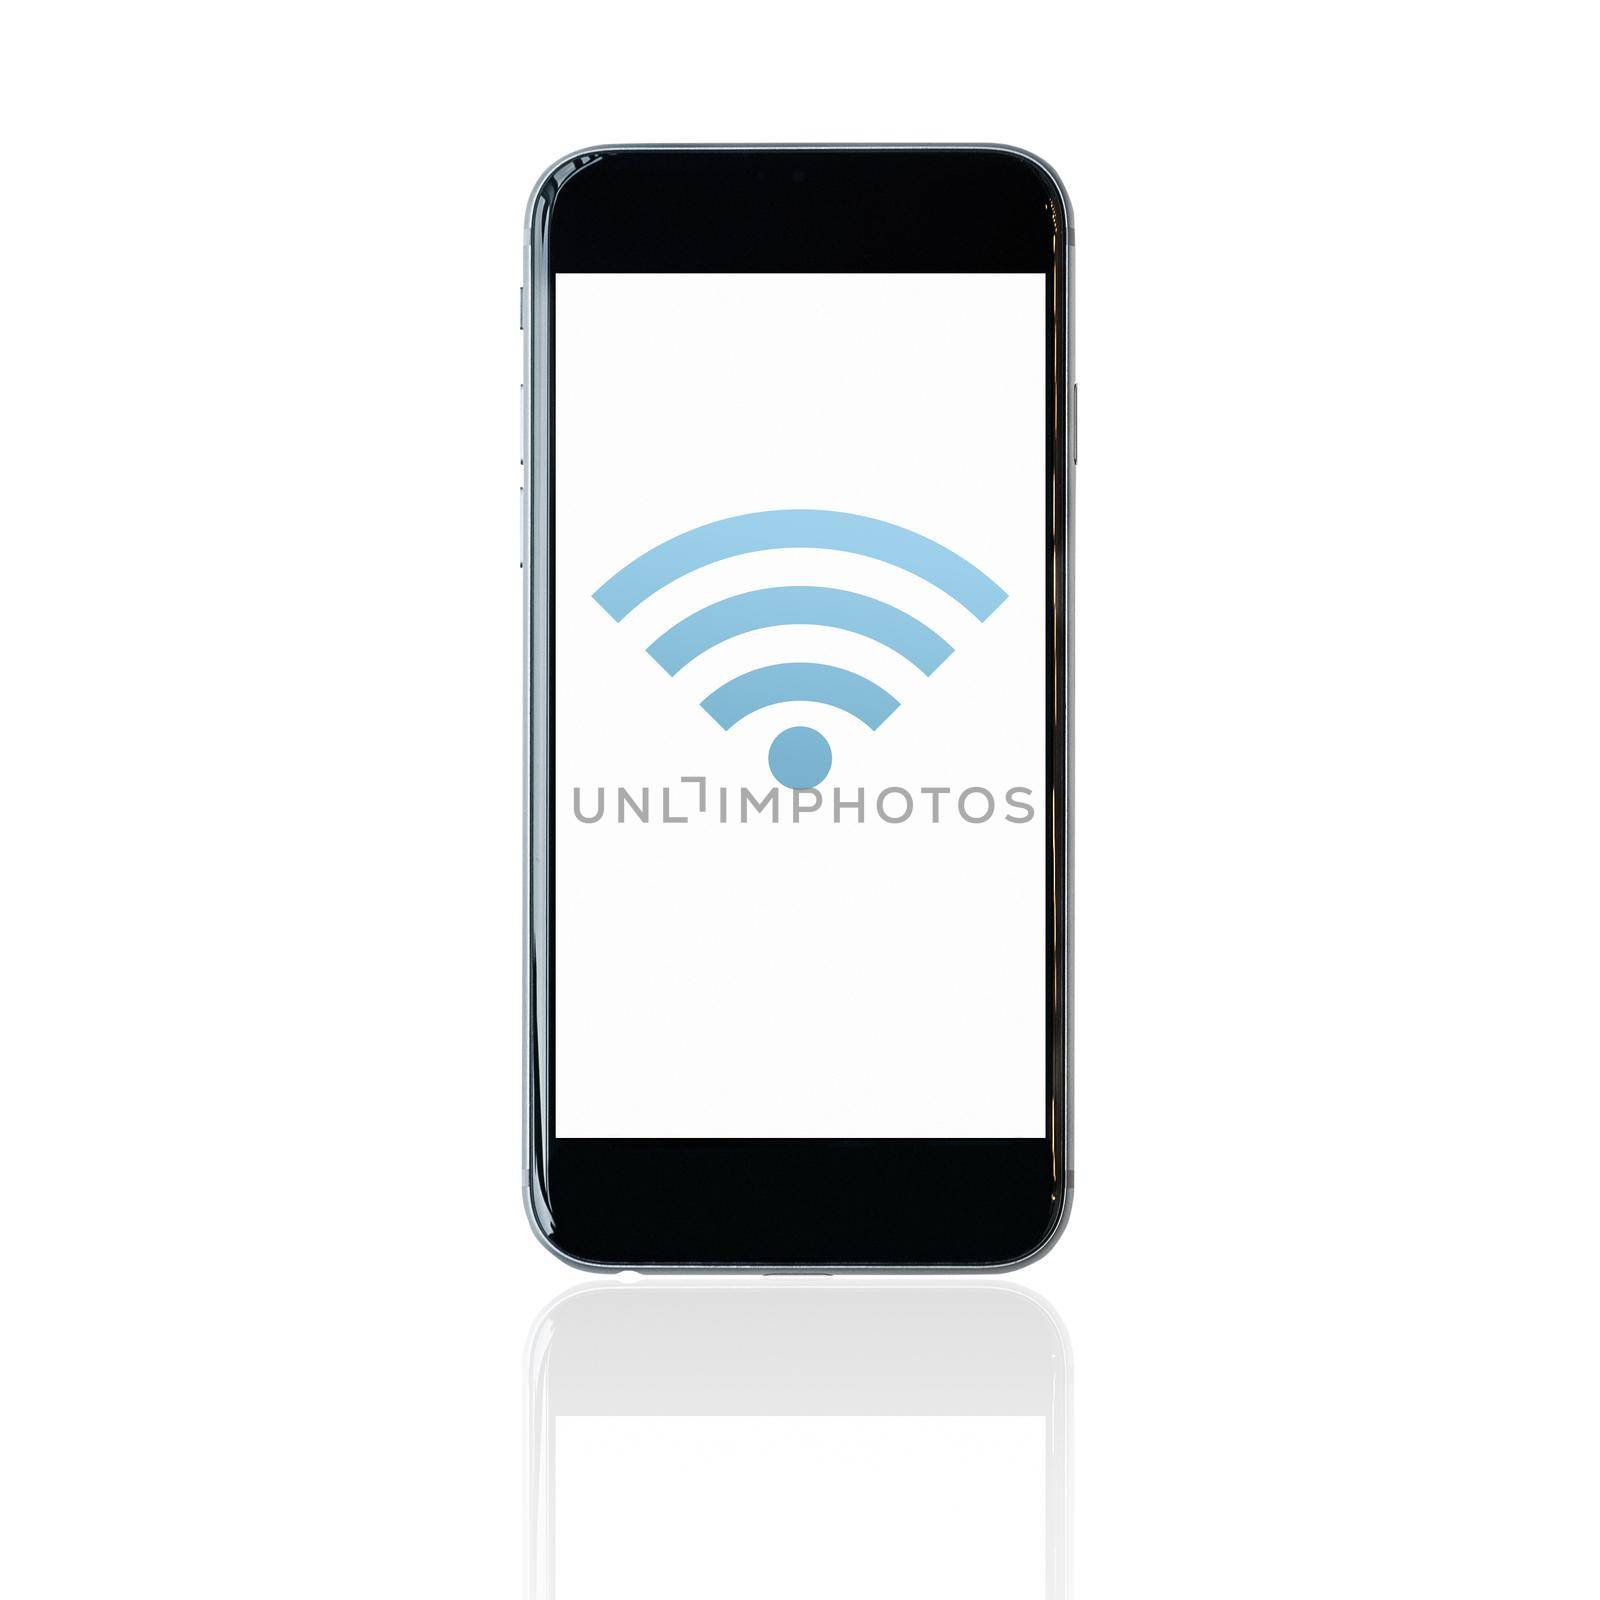 Smartphone with wifi symbol on screen on white background. Elegant Design for smart technology and internet of things concept